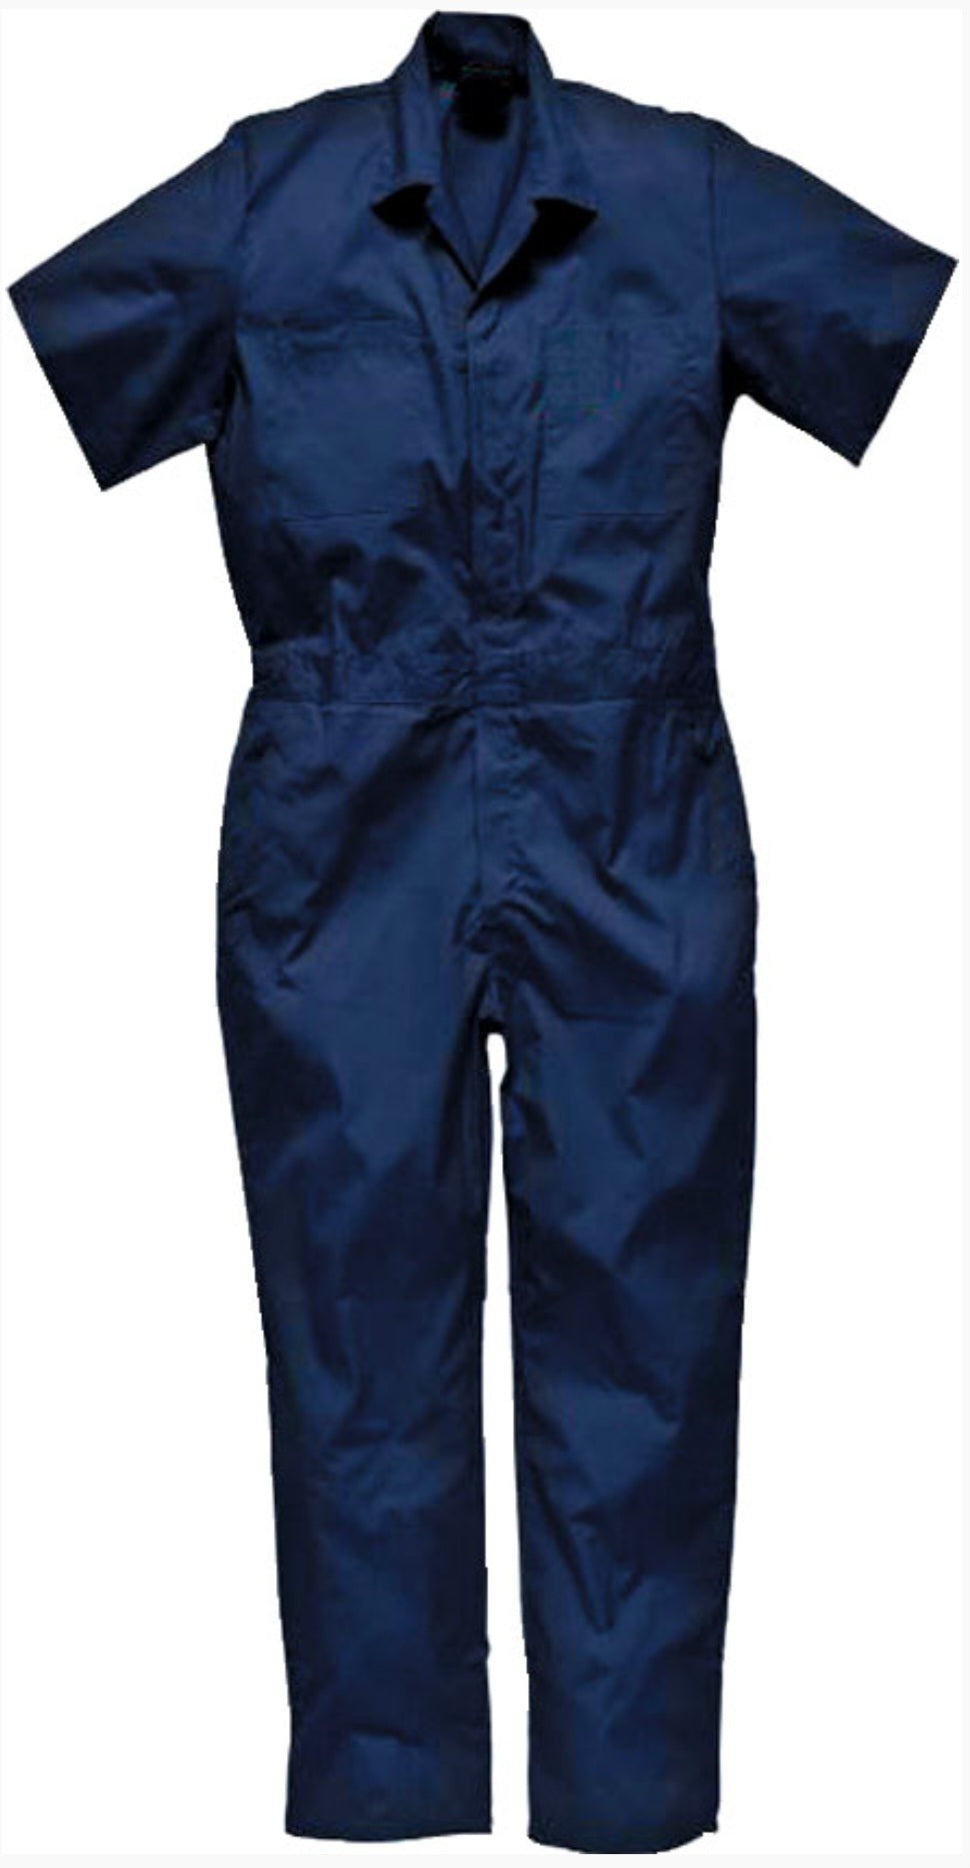 Working Wear 100% Cotton Short Sleeve Coverall